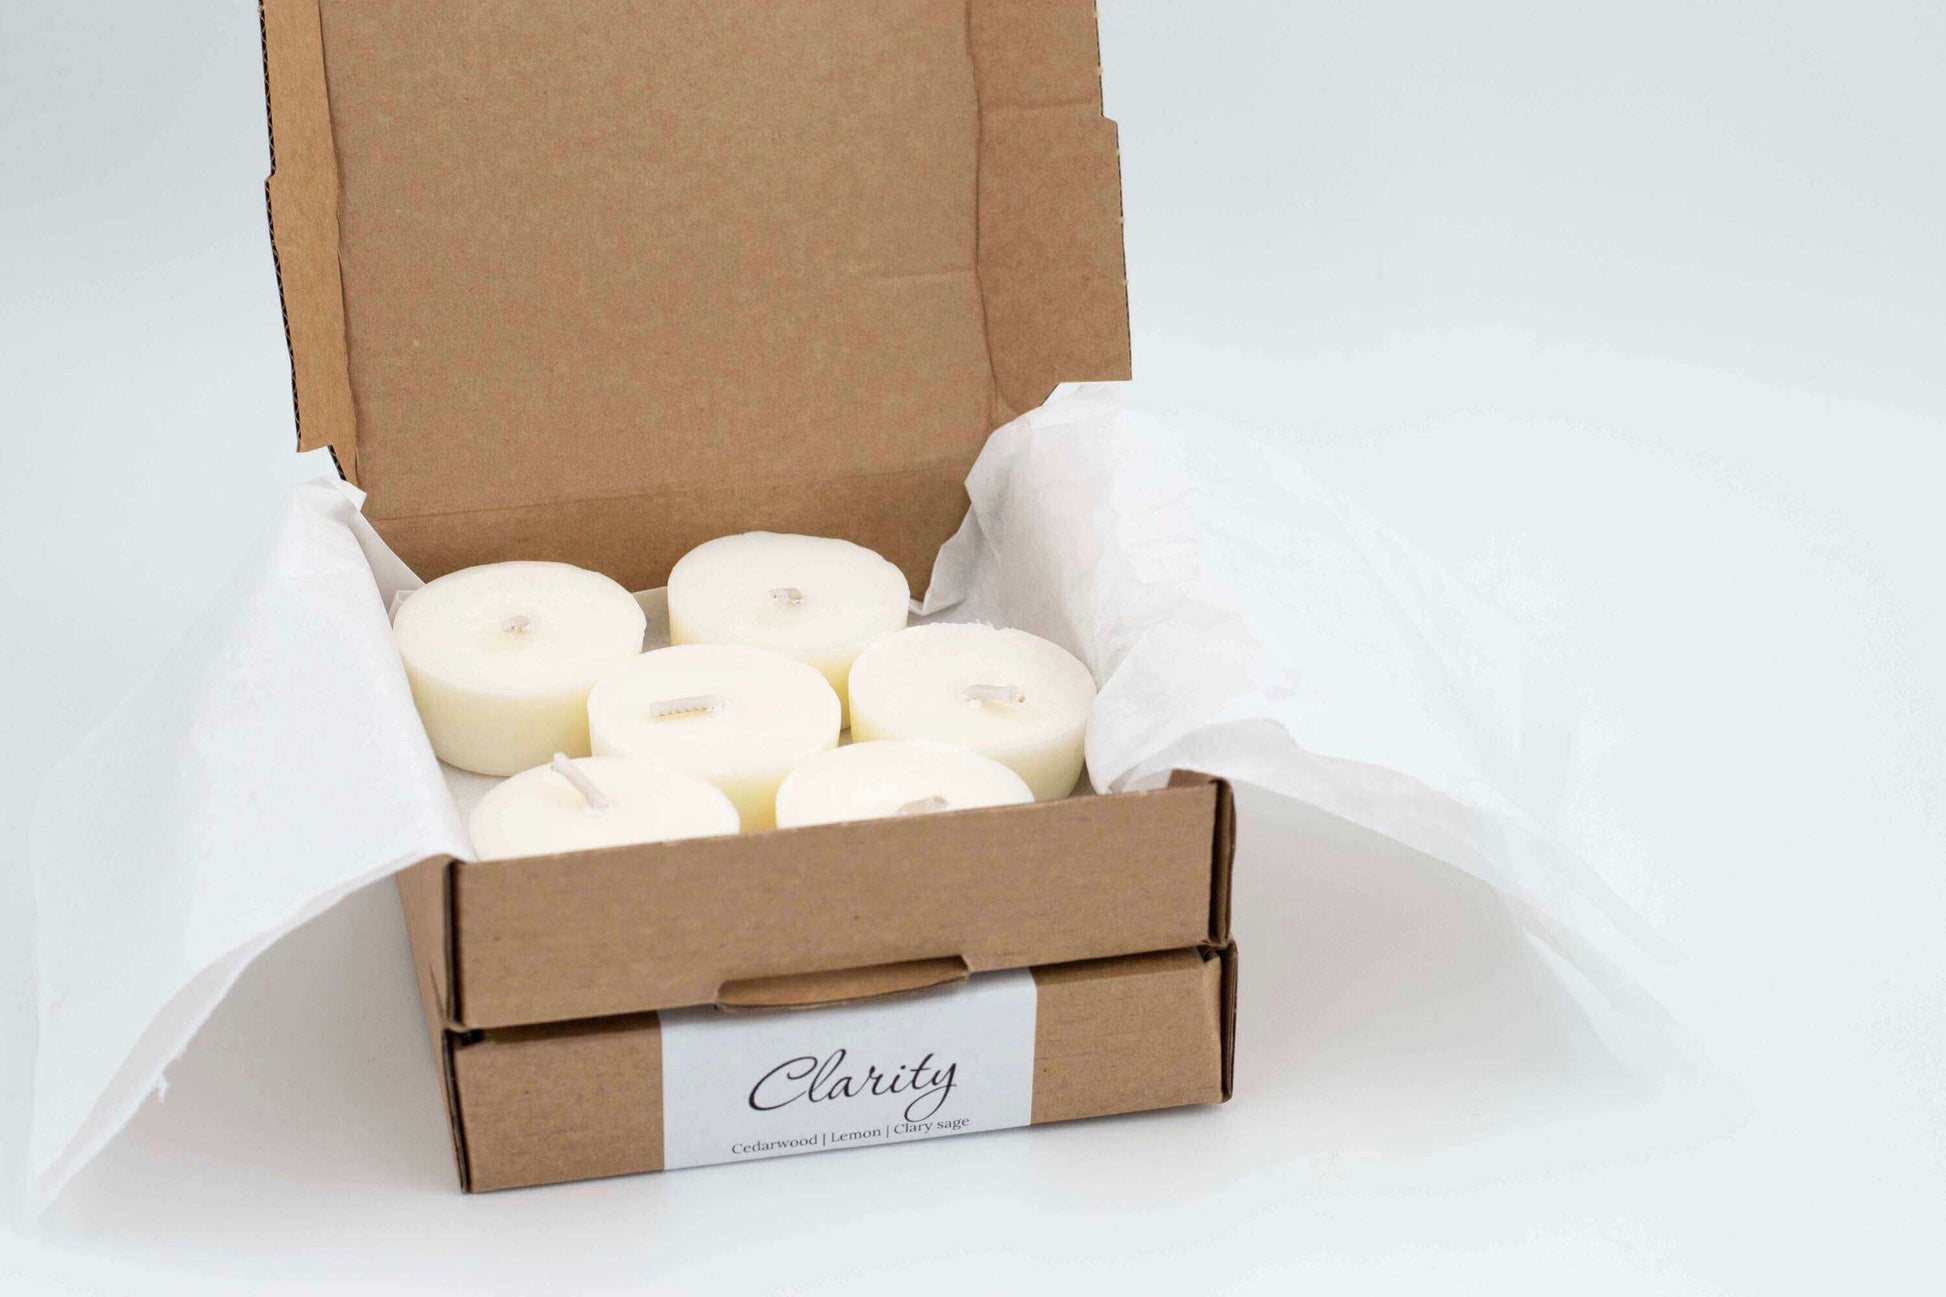 6-pack of Clarity tea light candles made with cedarwood, lemon, and clary sage, natural and refillable tealights, packaged in an eco-friendly box with tissue paper.